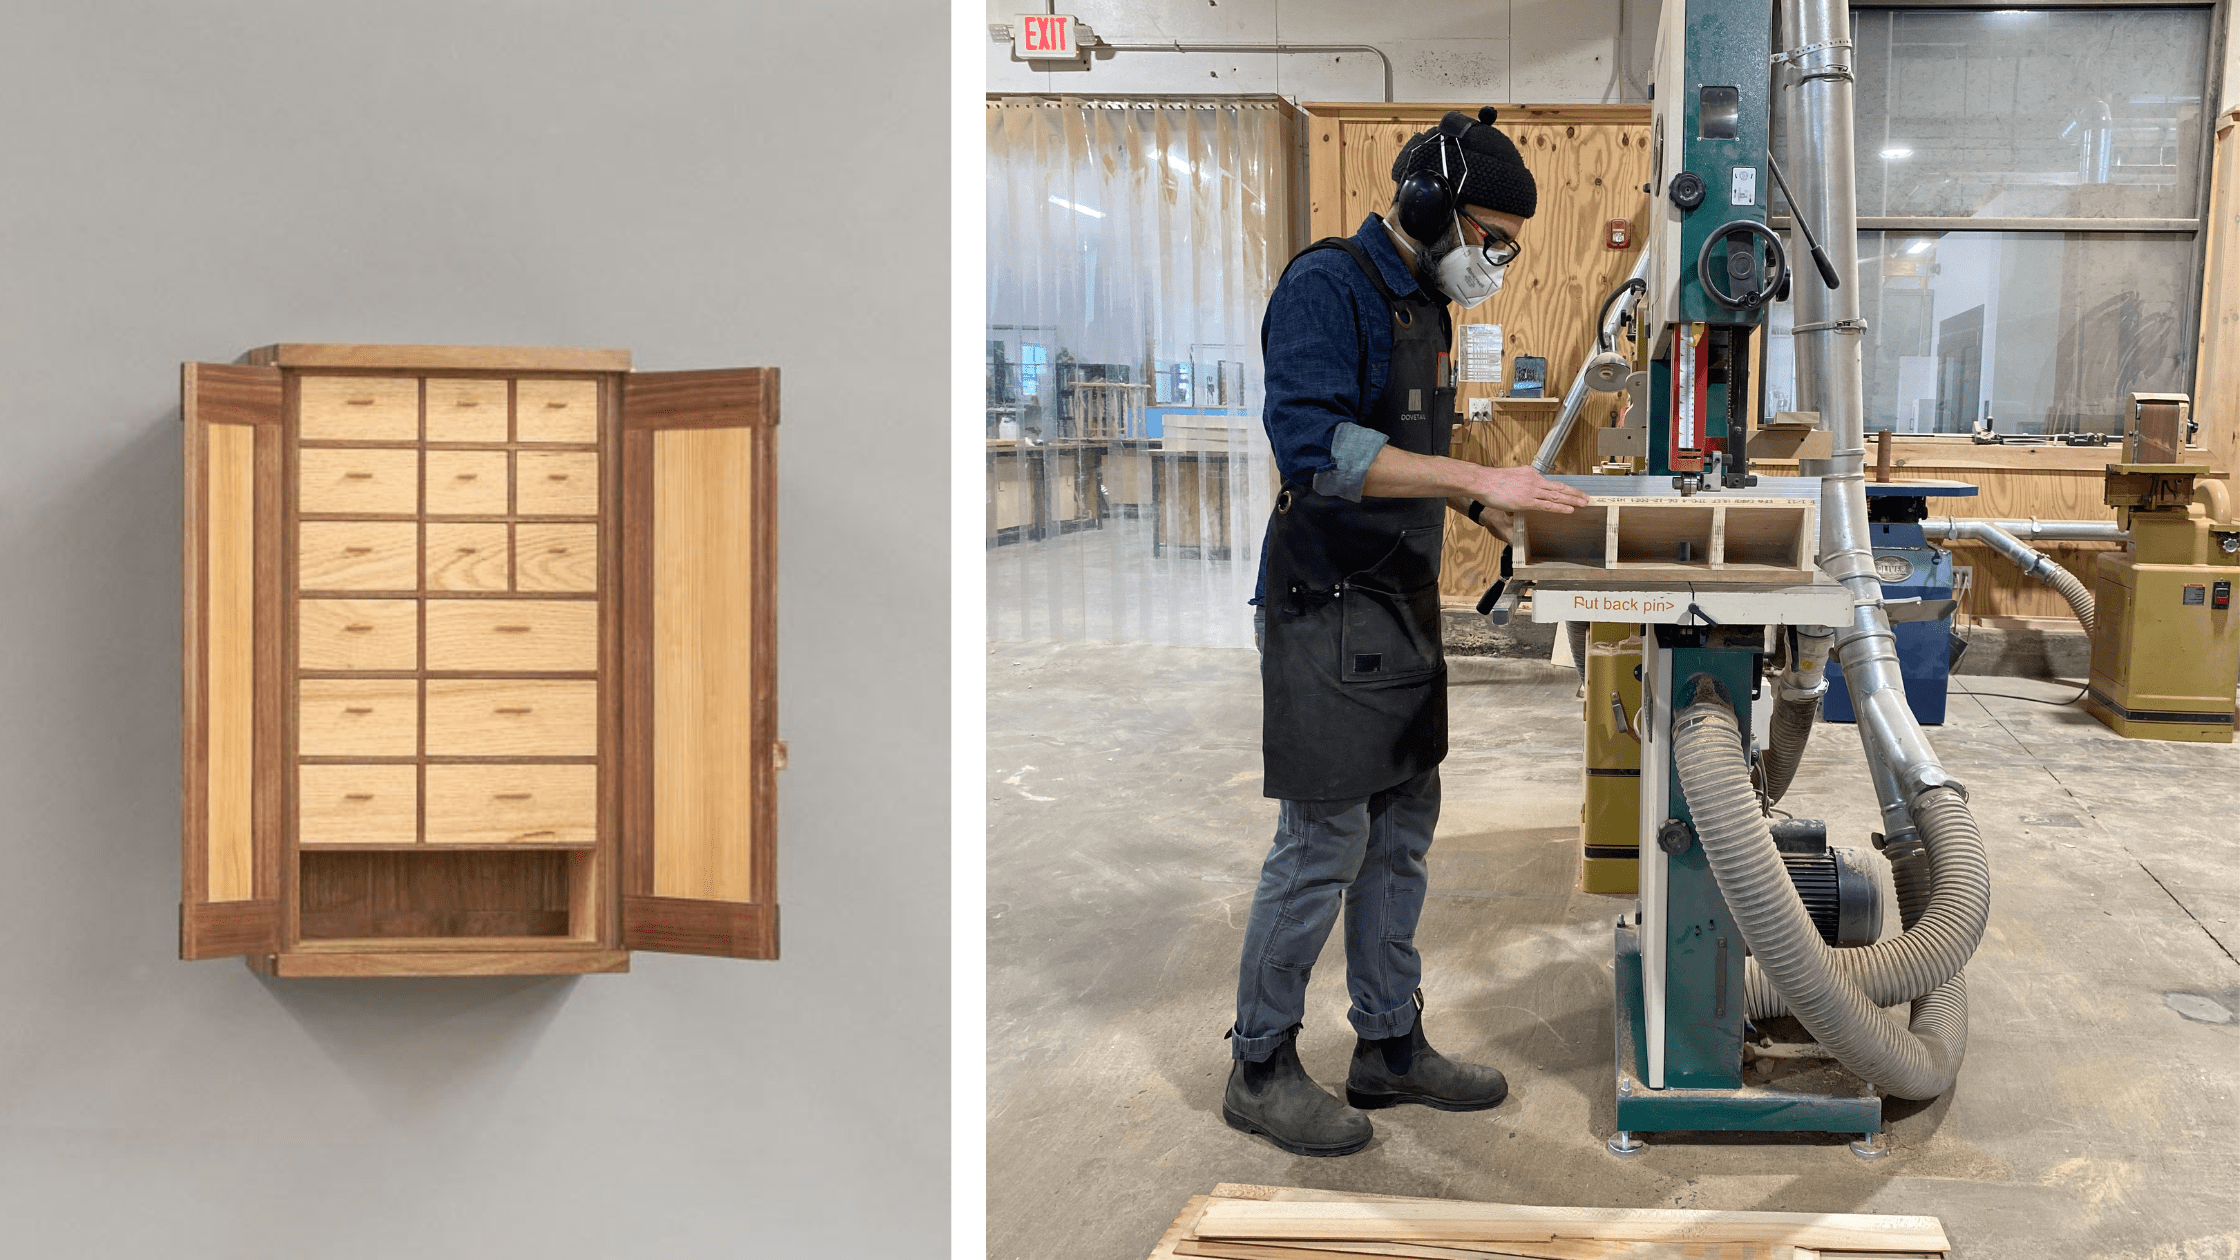 Meet Our Monthly Maker: Michael Ferrin, Woodworker and Artist